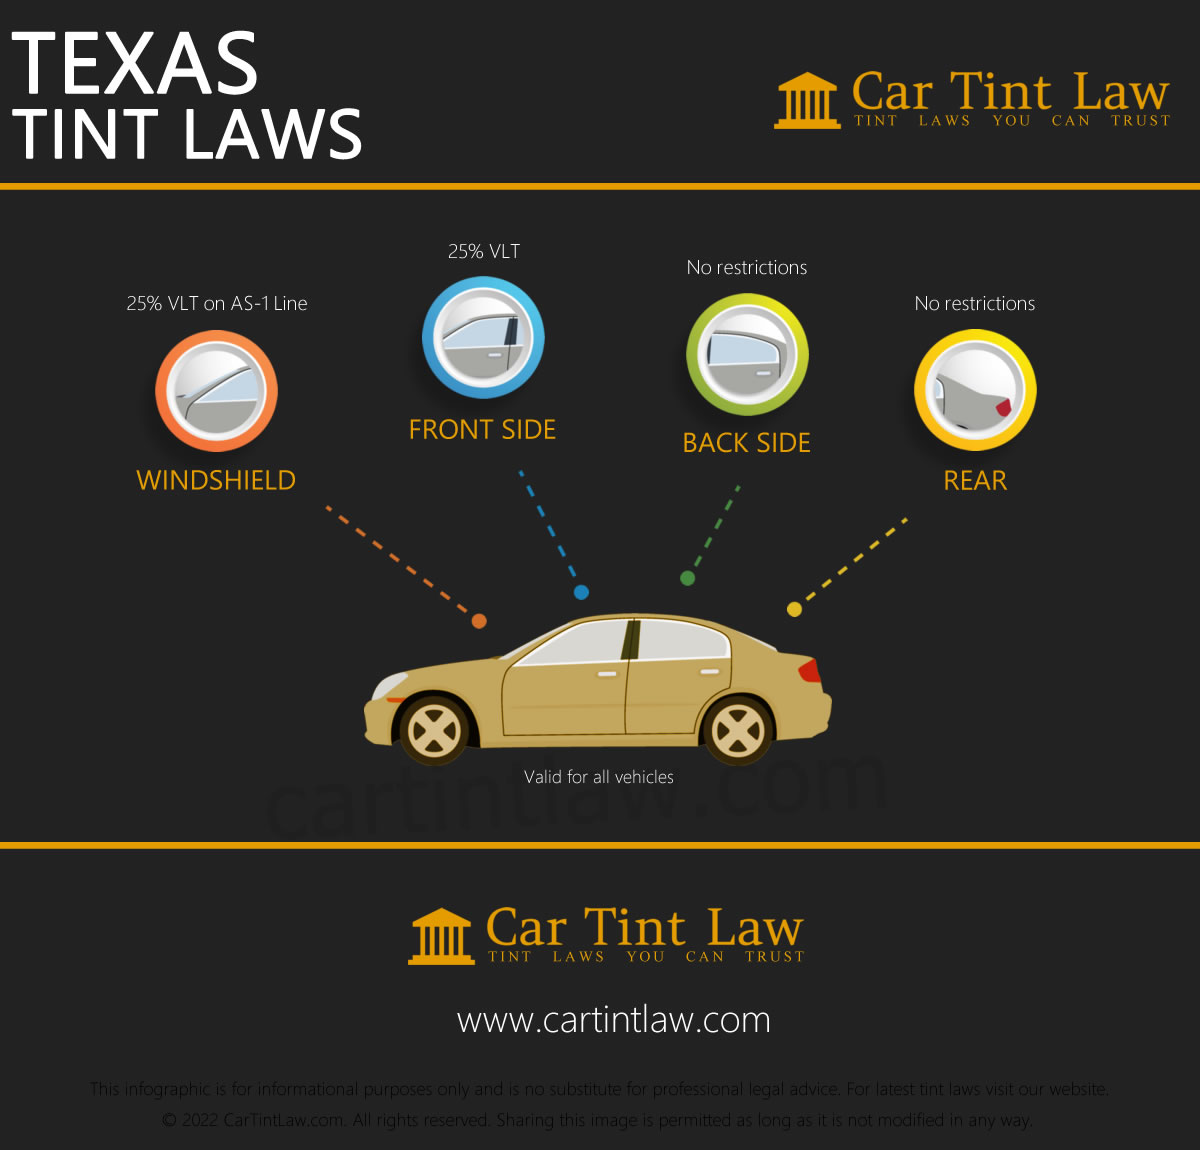 Texas Tint Laws In 2018 - What you need to Know - Fletch Window Tint